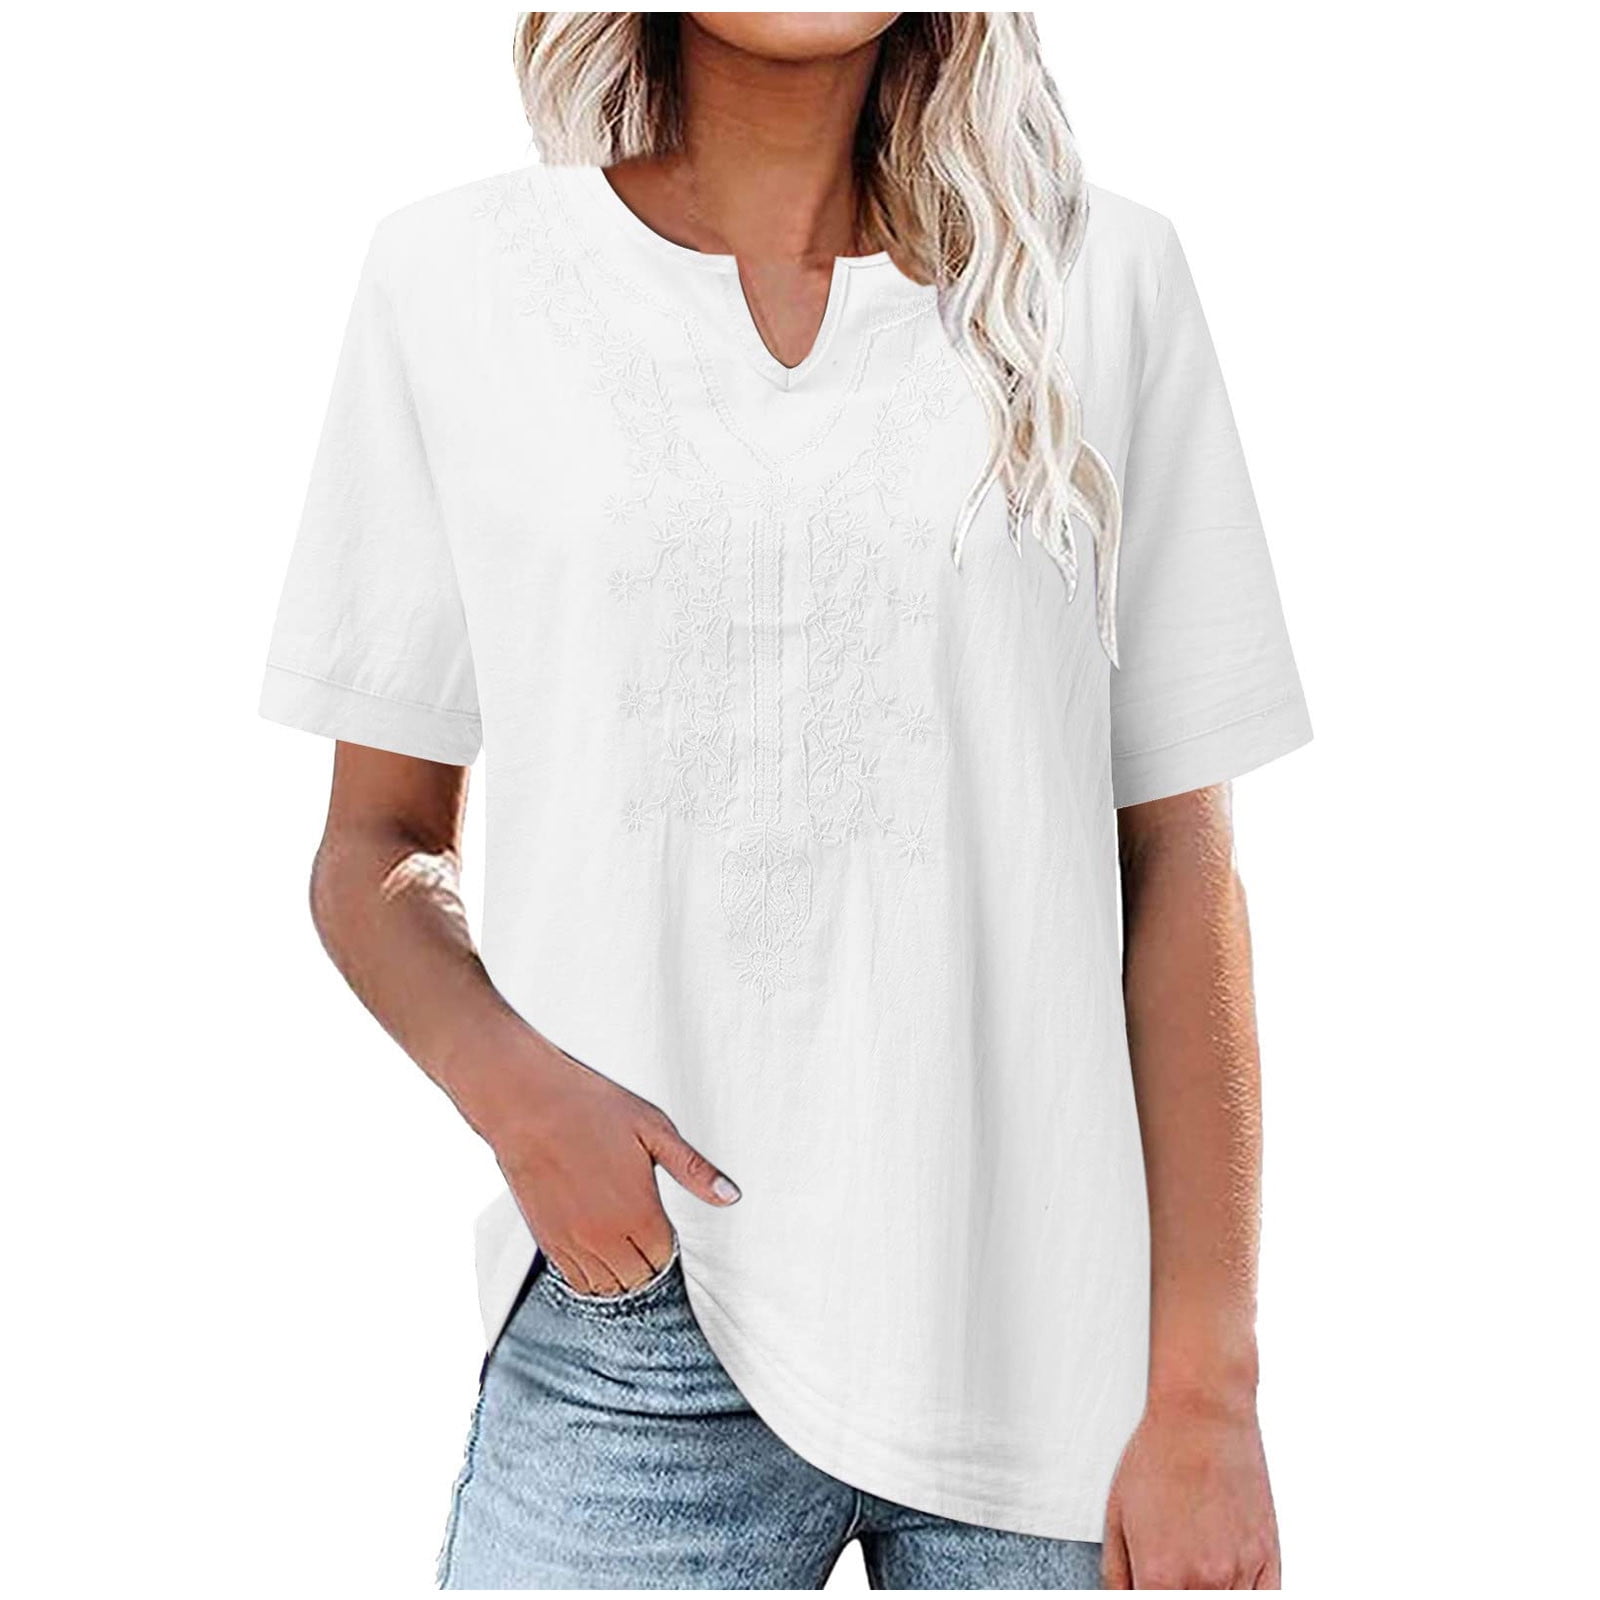 Tops for Women Casual Spring Short Sleeve V-Neck Blouses & Shirts ...